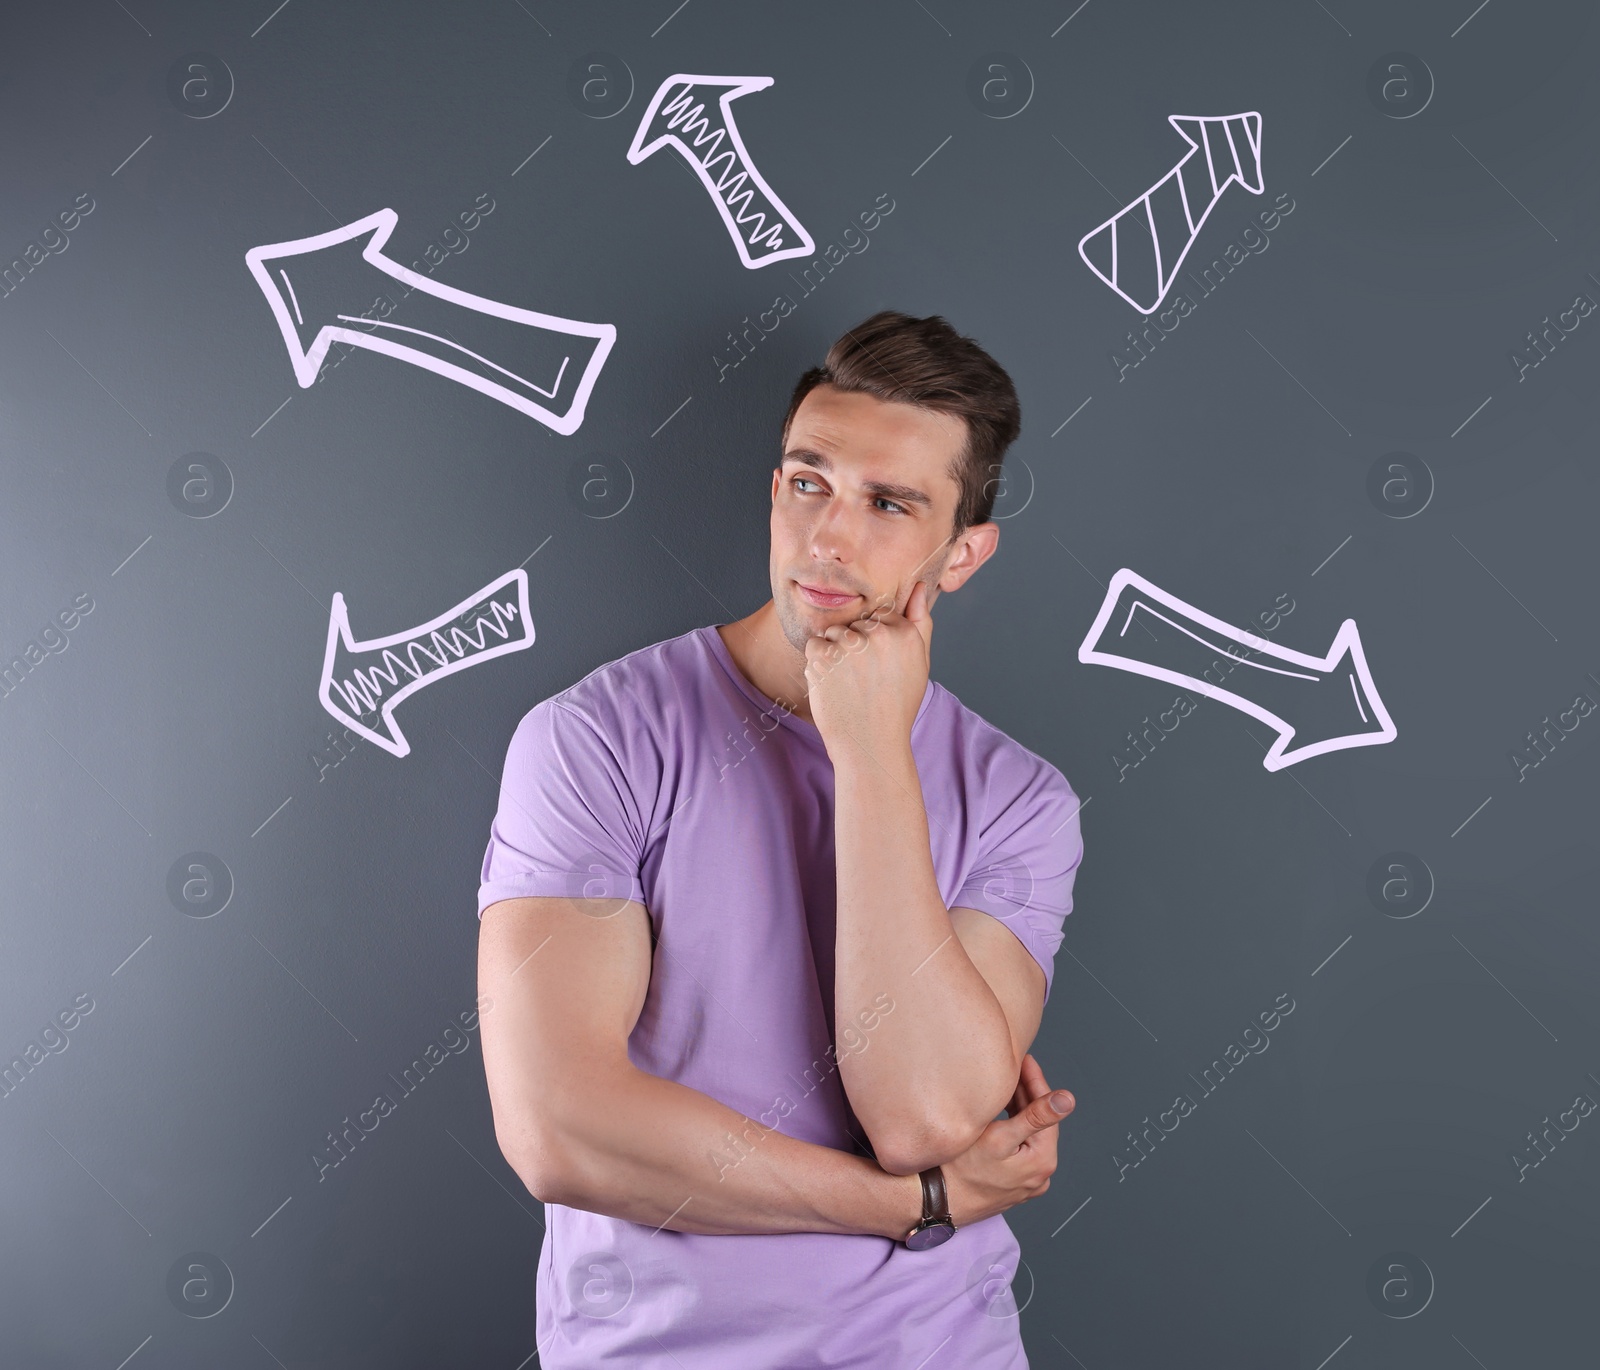 Image of Choice in profession or other areas of life, concept. Making decision, thoughtful young man surrounded by drawn arrows on grey background